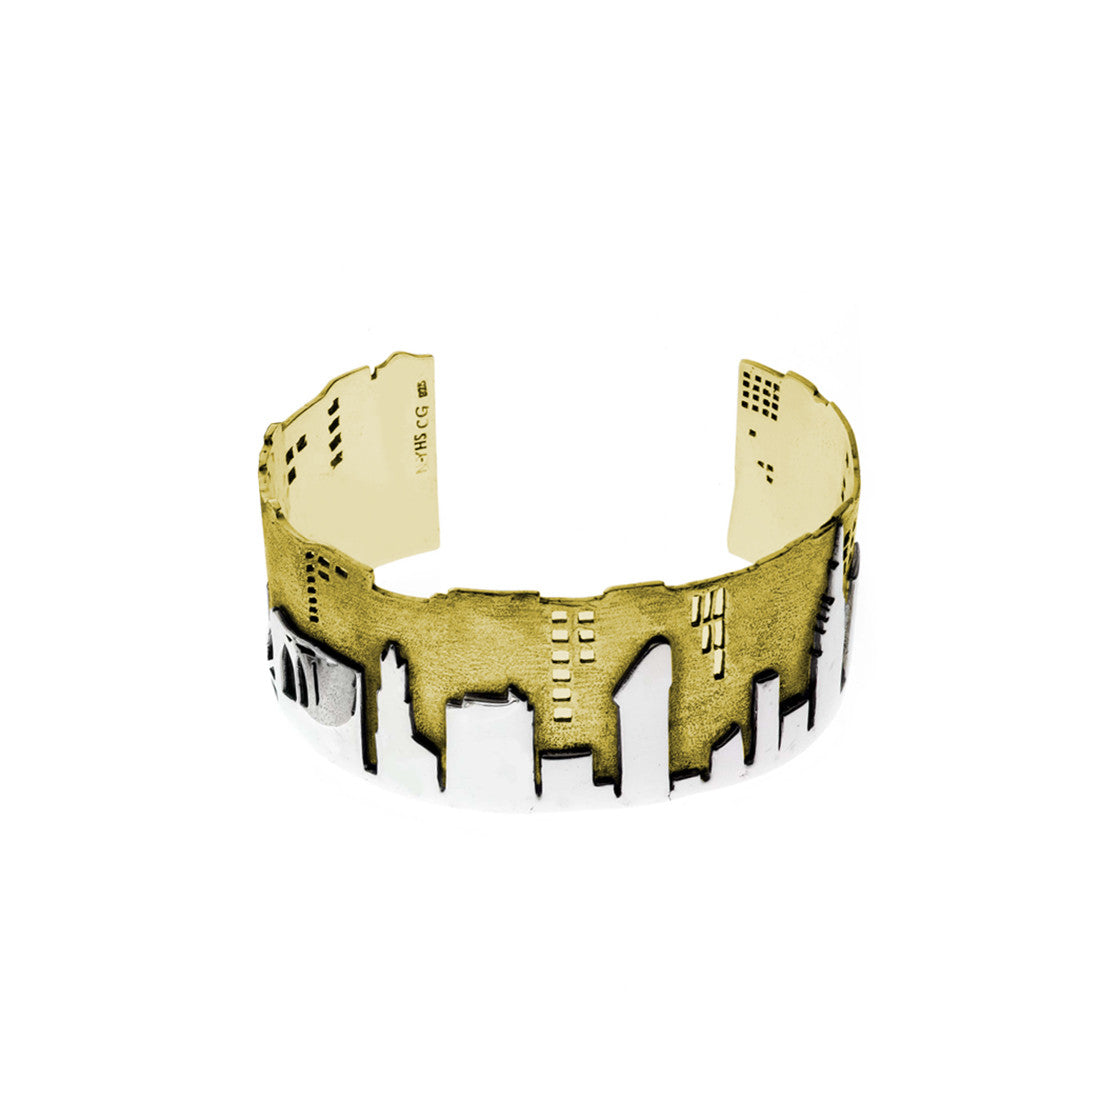 NYC Skyline The City That never Sleeps Sterling Silver & Brass Cuff - Cynthia Gale New York - 2